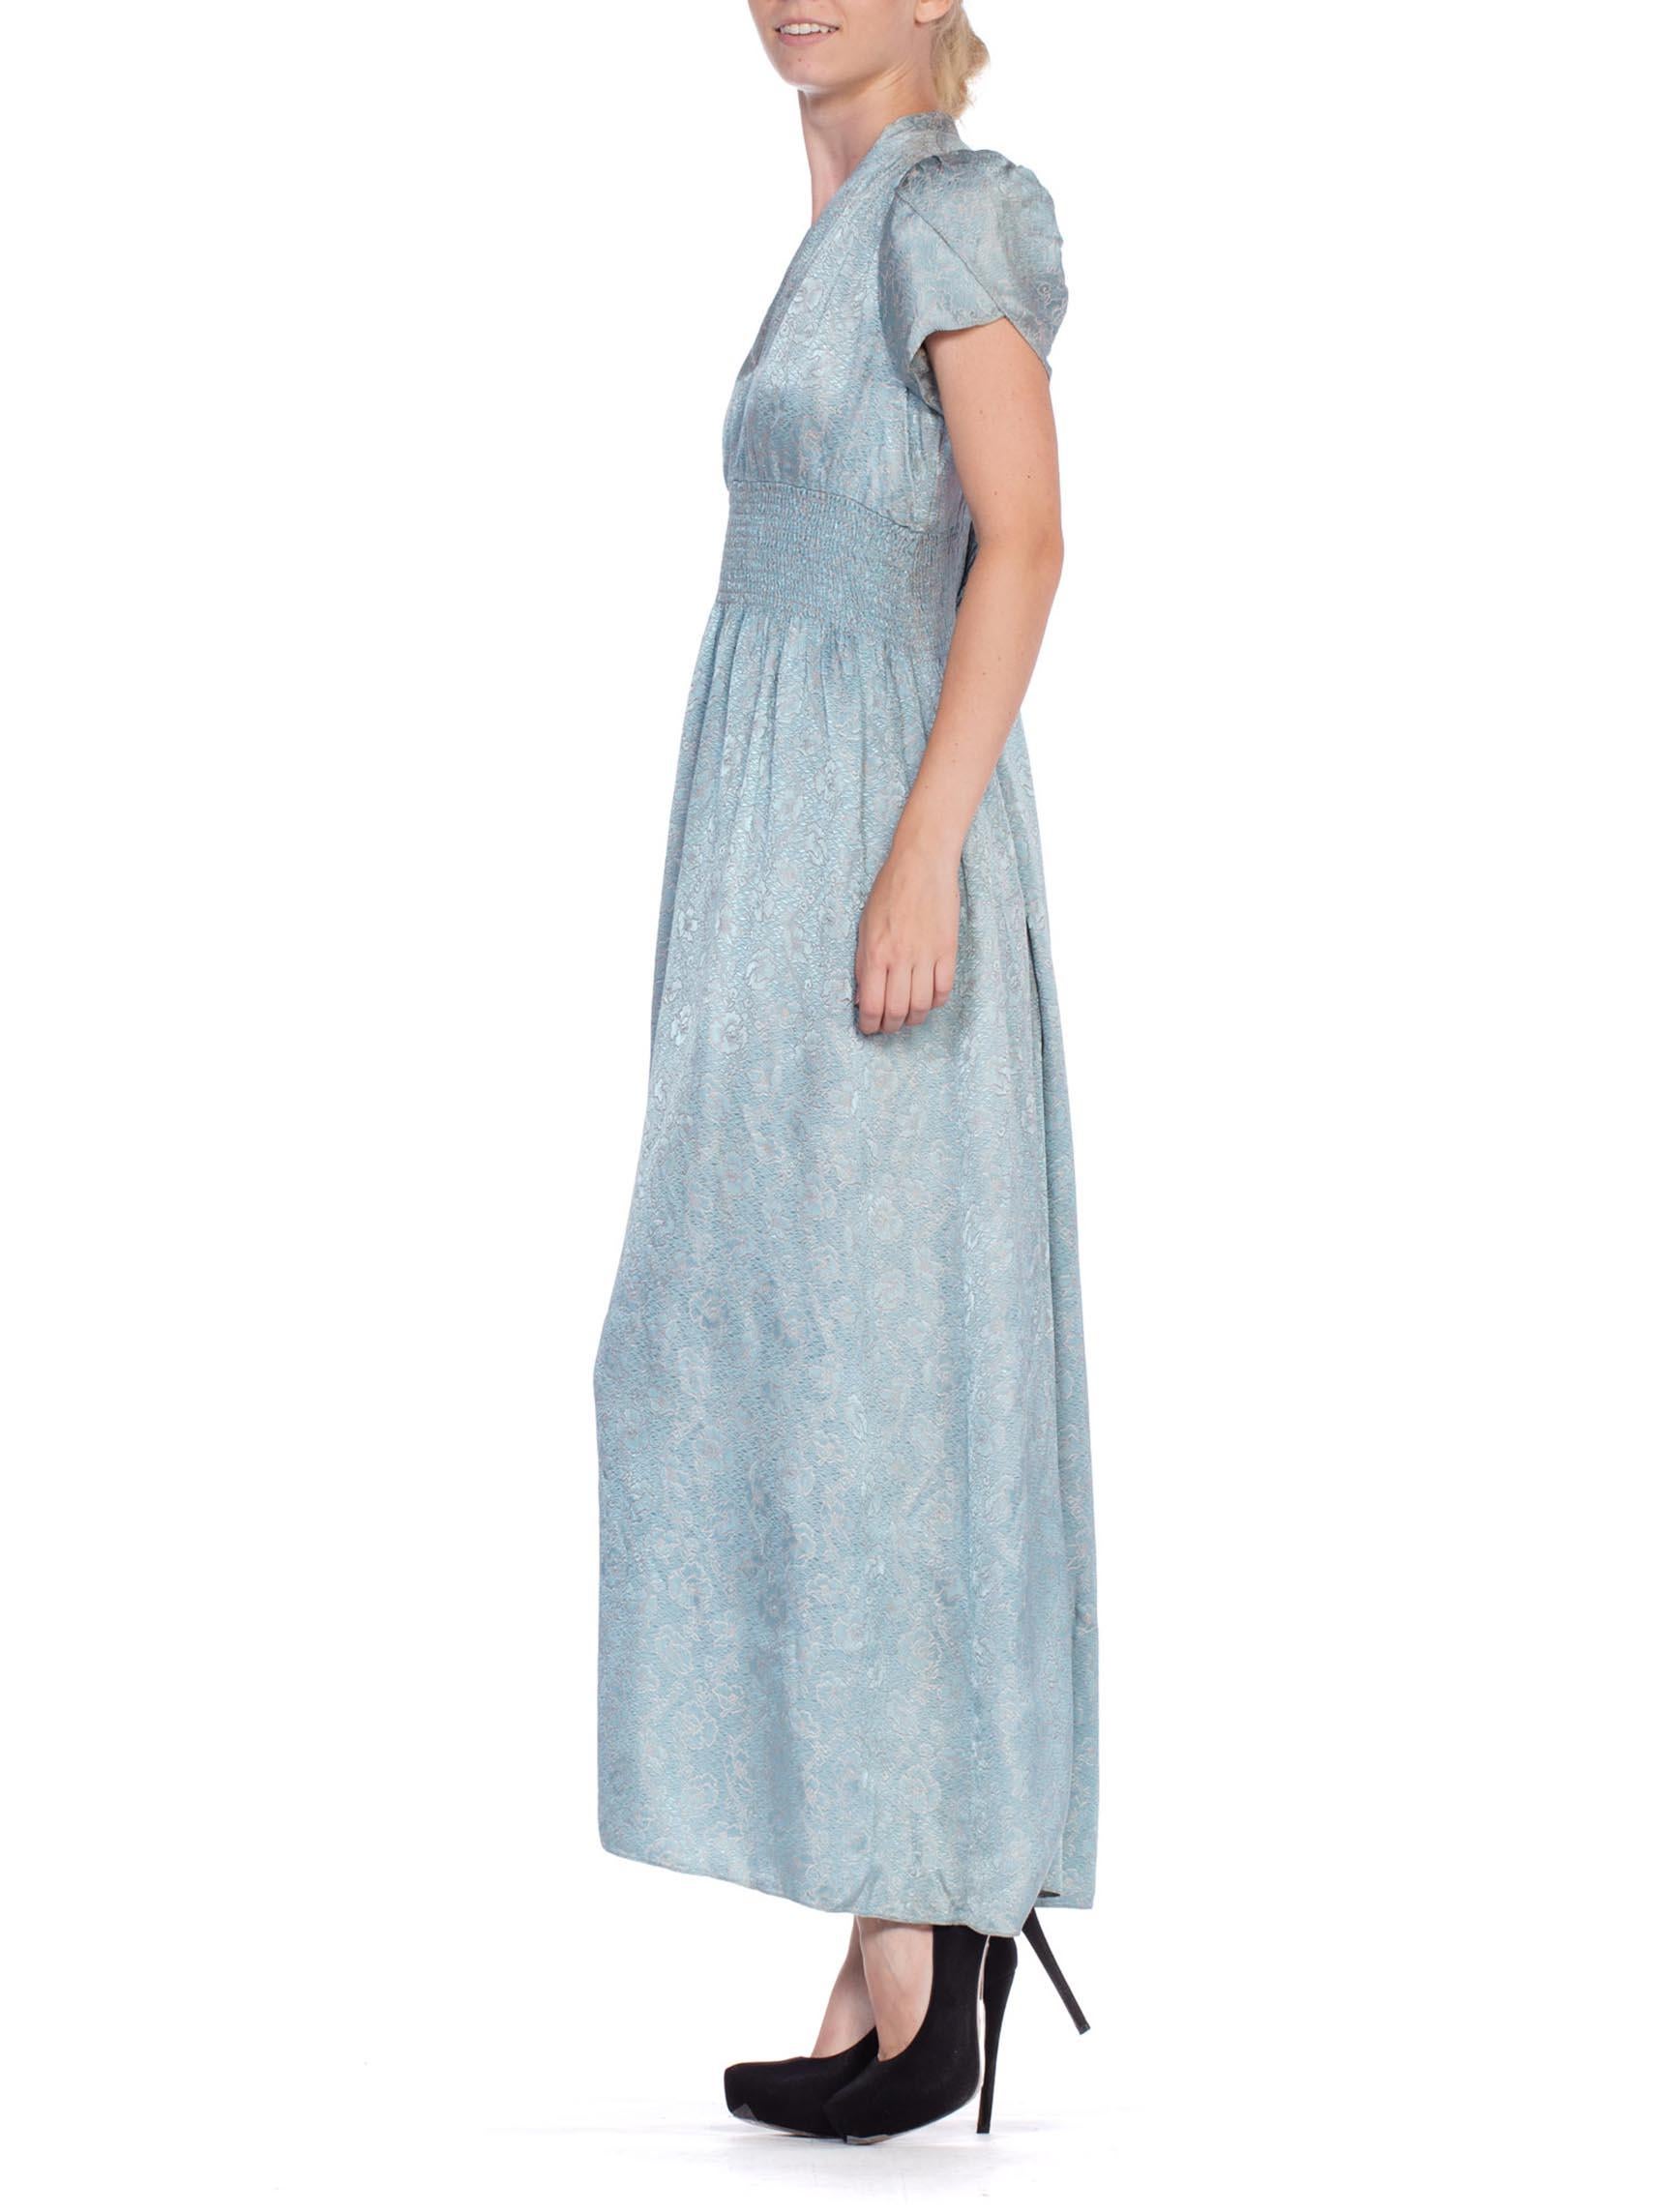 baby blue negligee